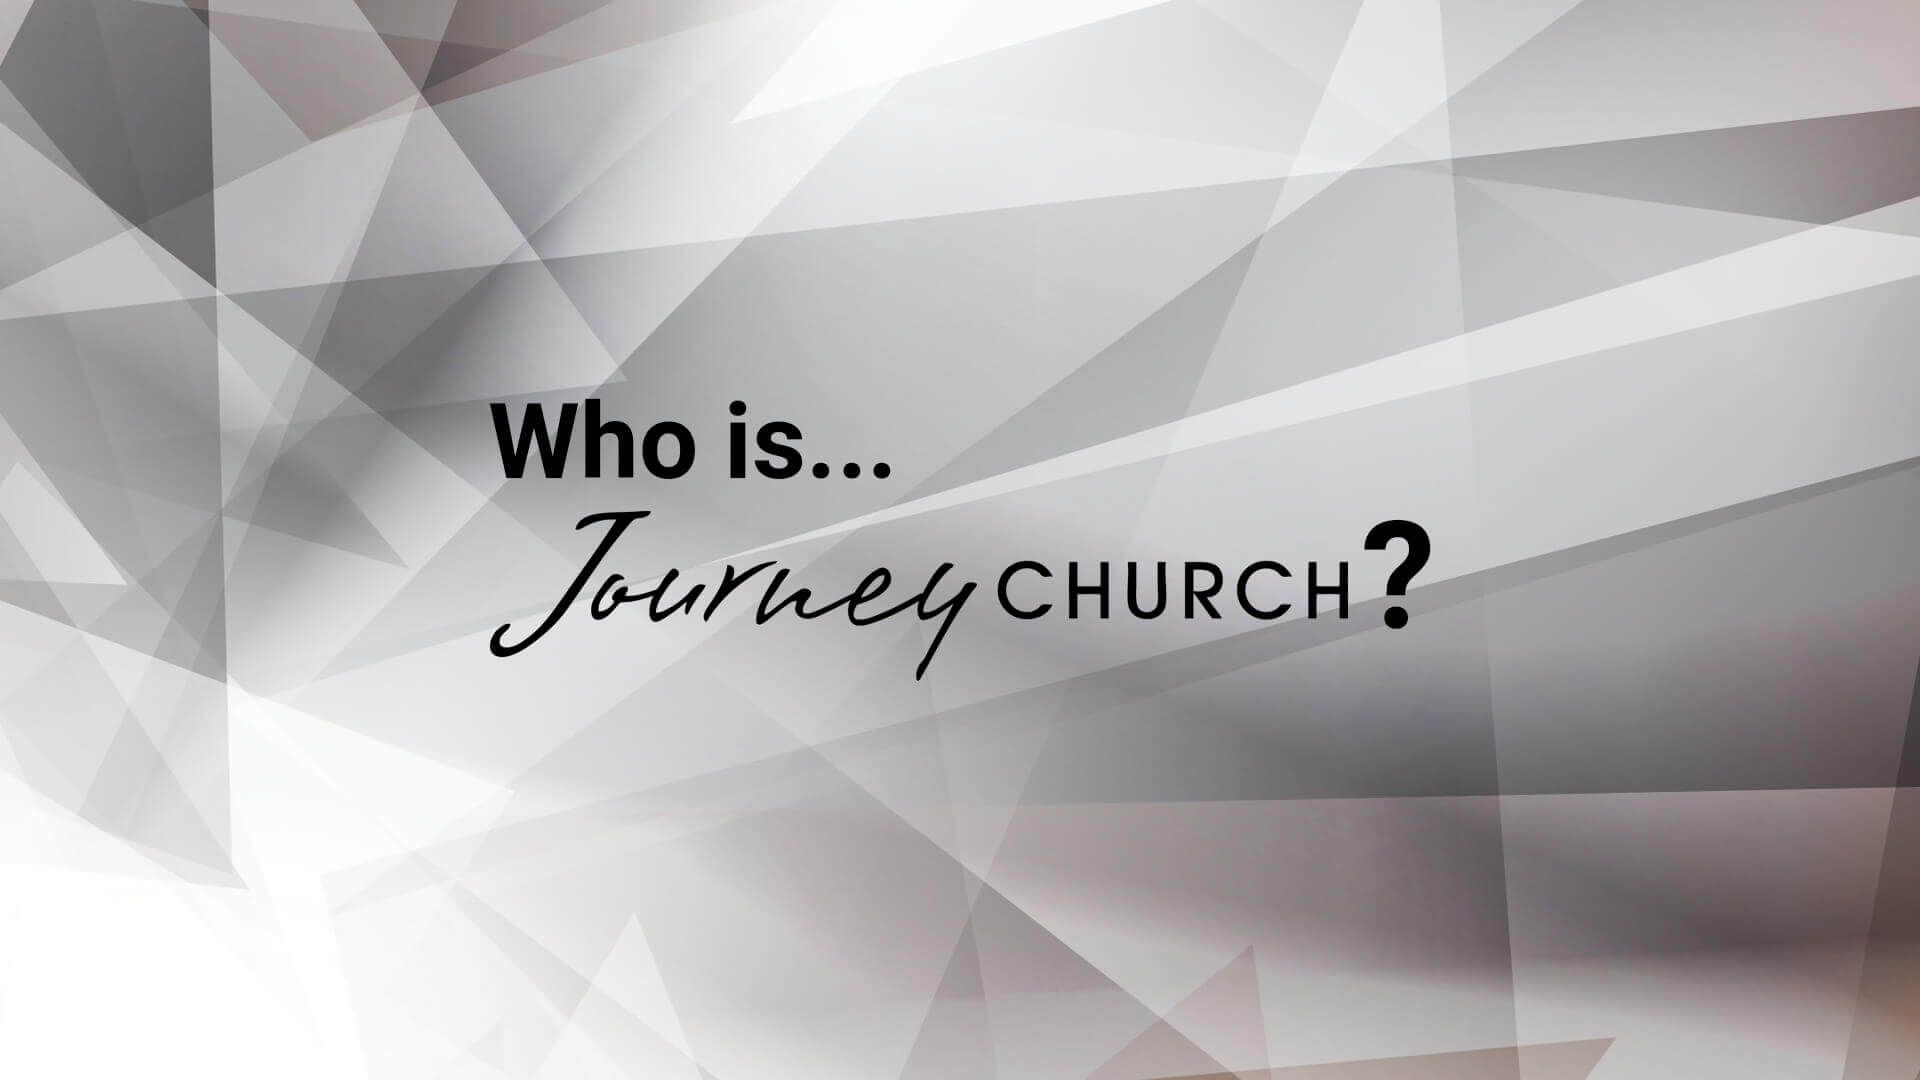 Who is Journey Church?